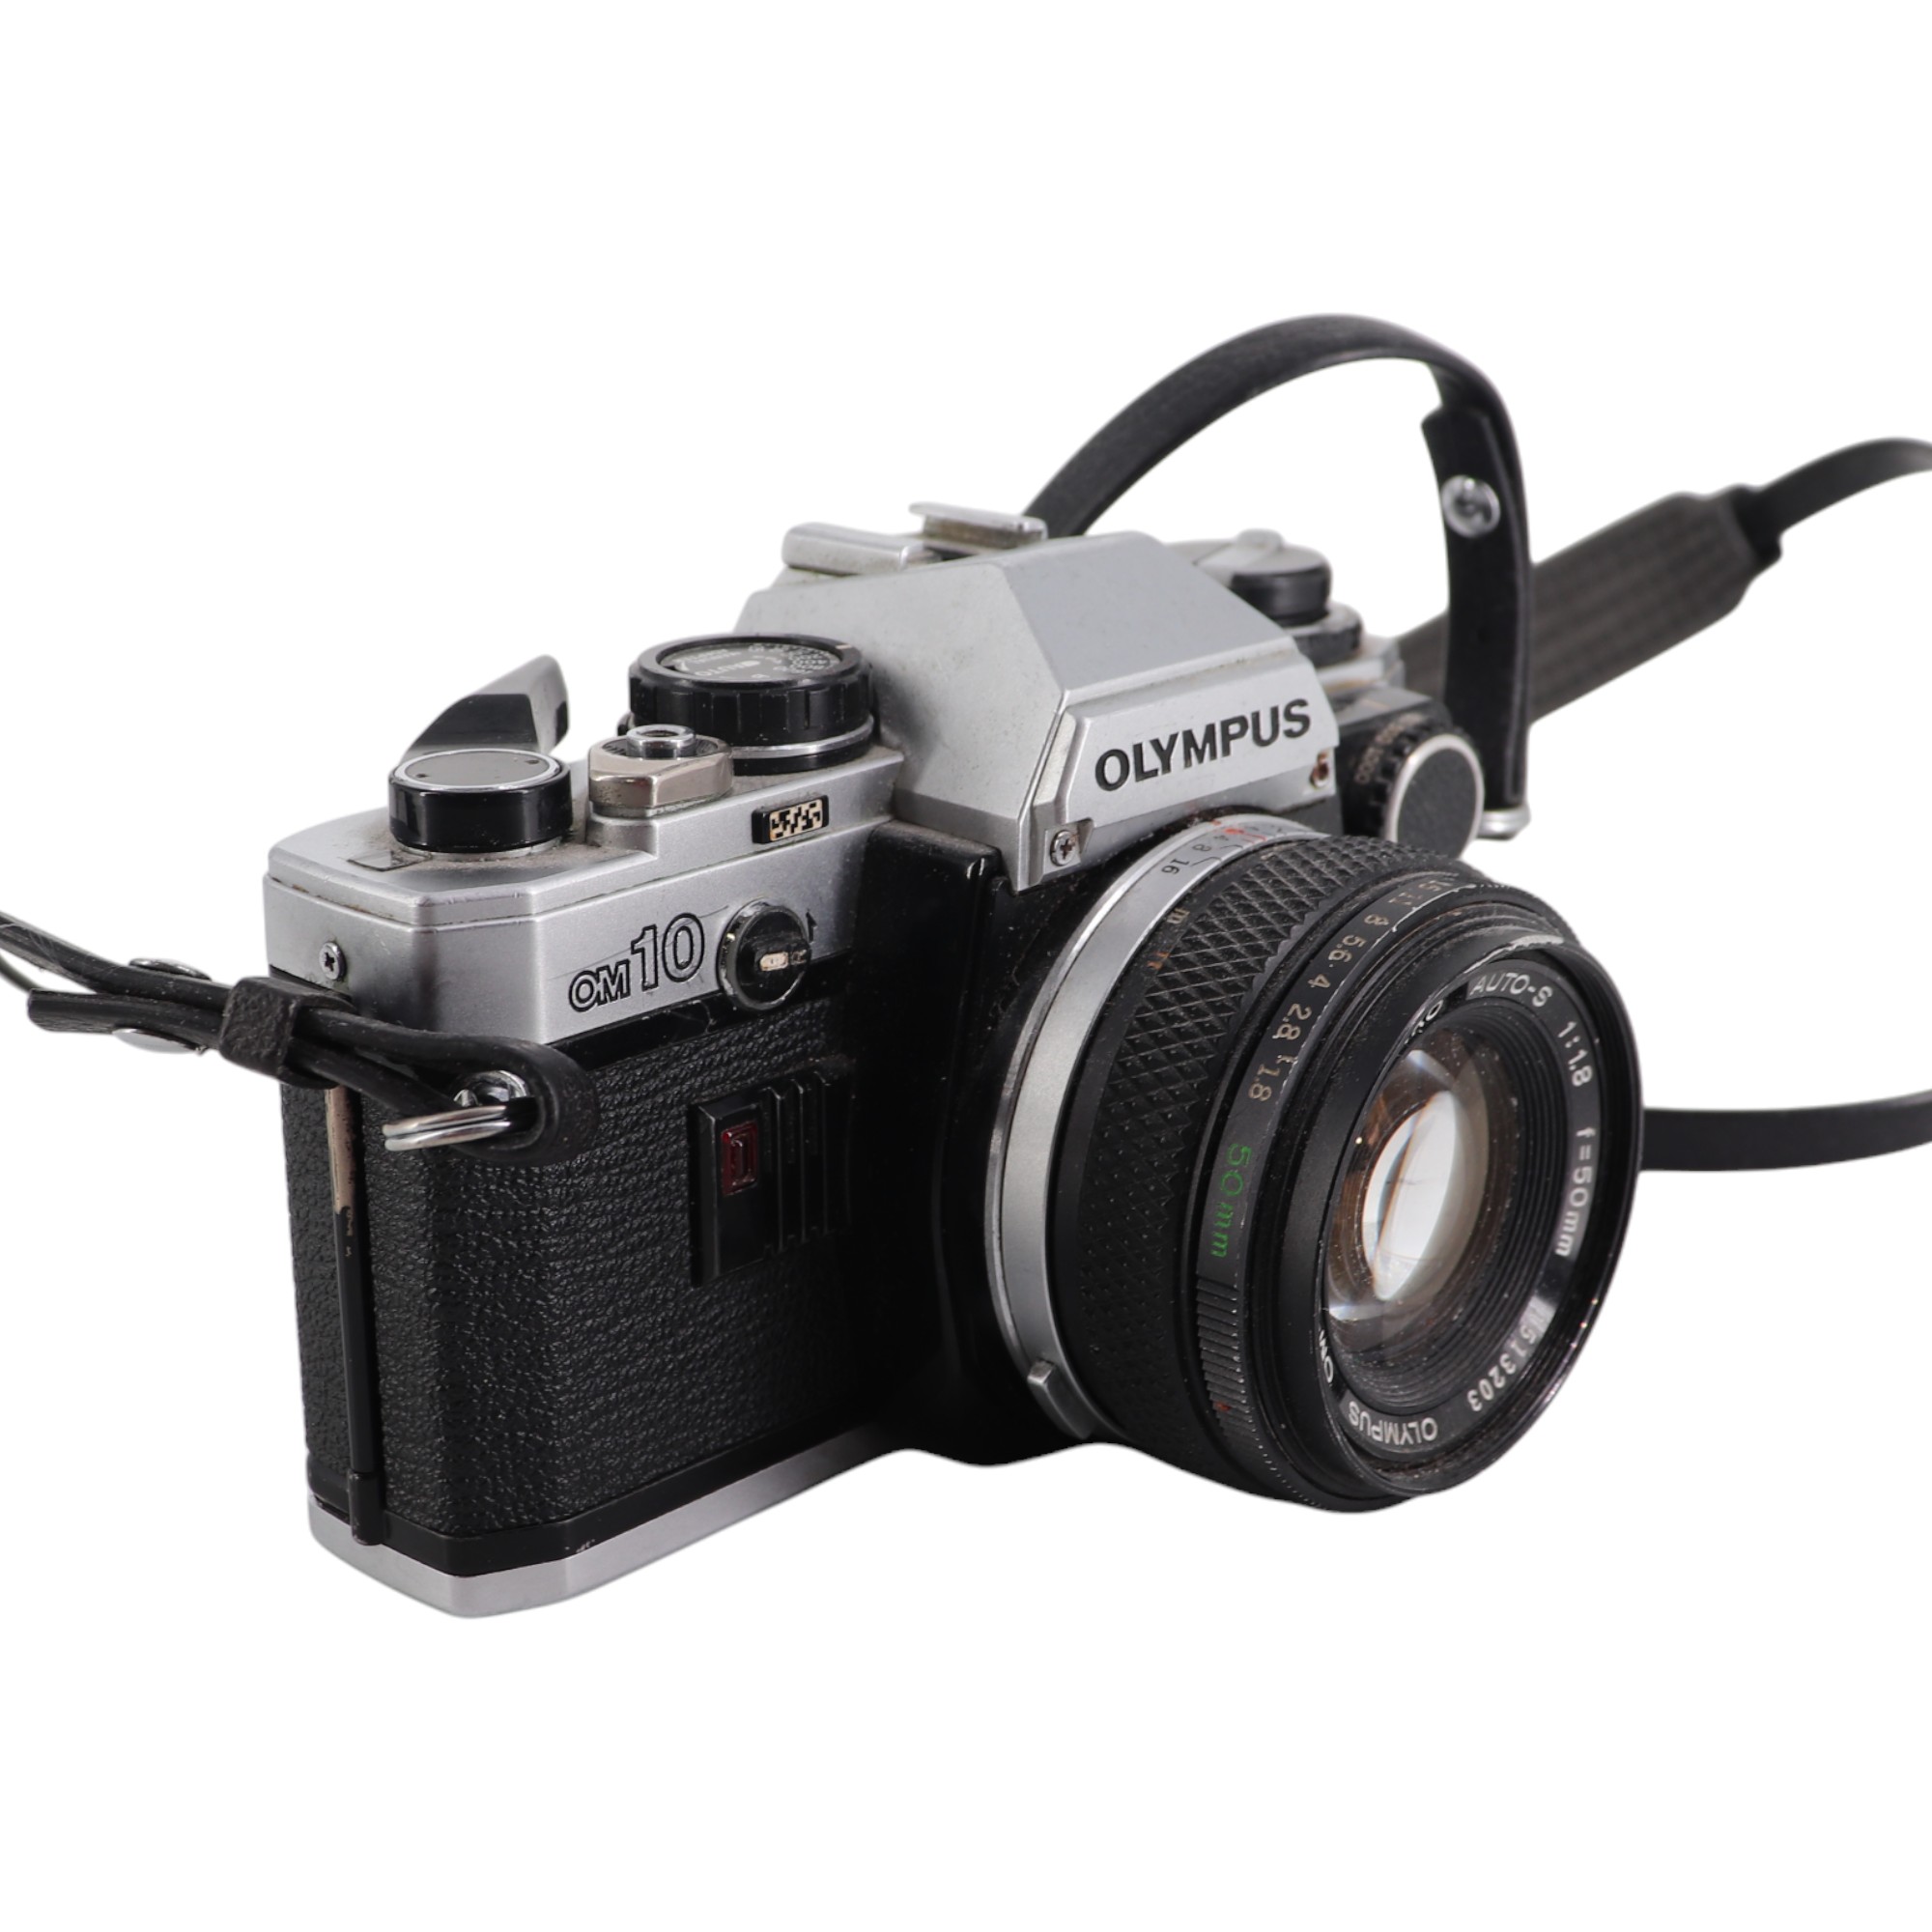 A 1980s Olympus OM10 35 mm reflex camera mounted with a 50 mm F1.8 standard lens together with - Image 2 of 6